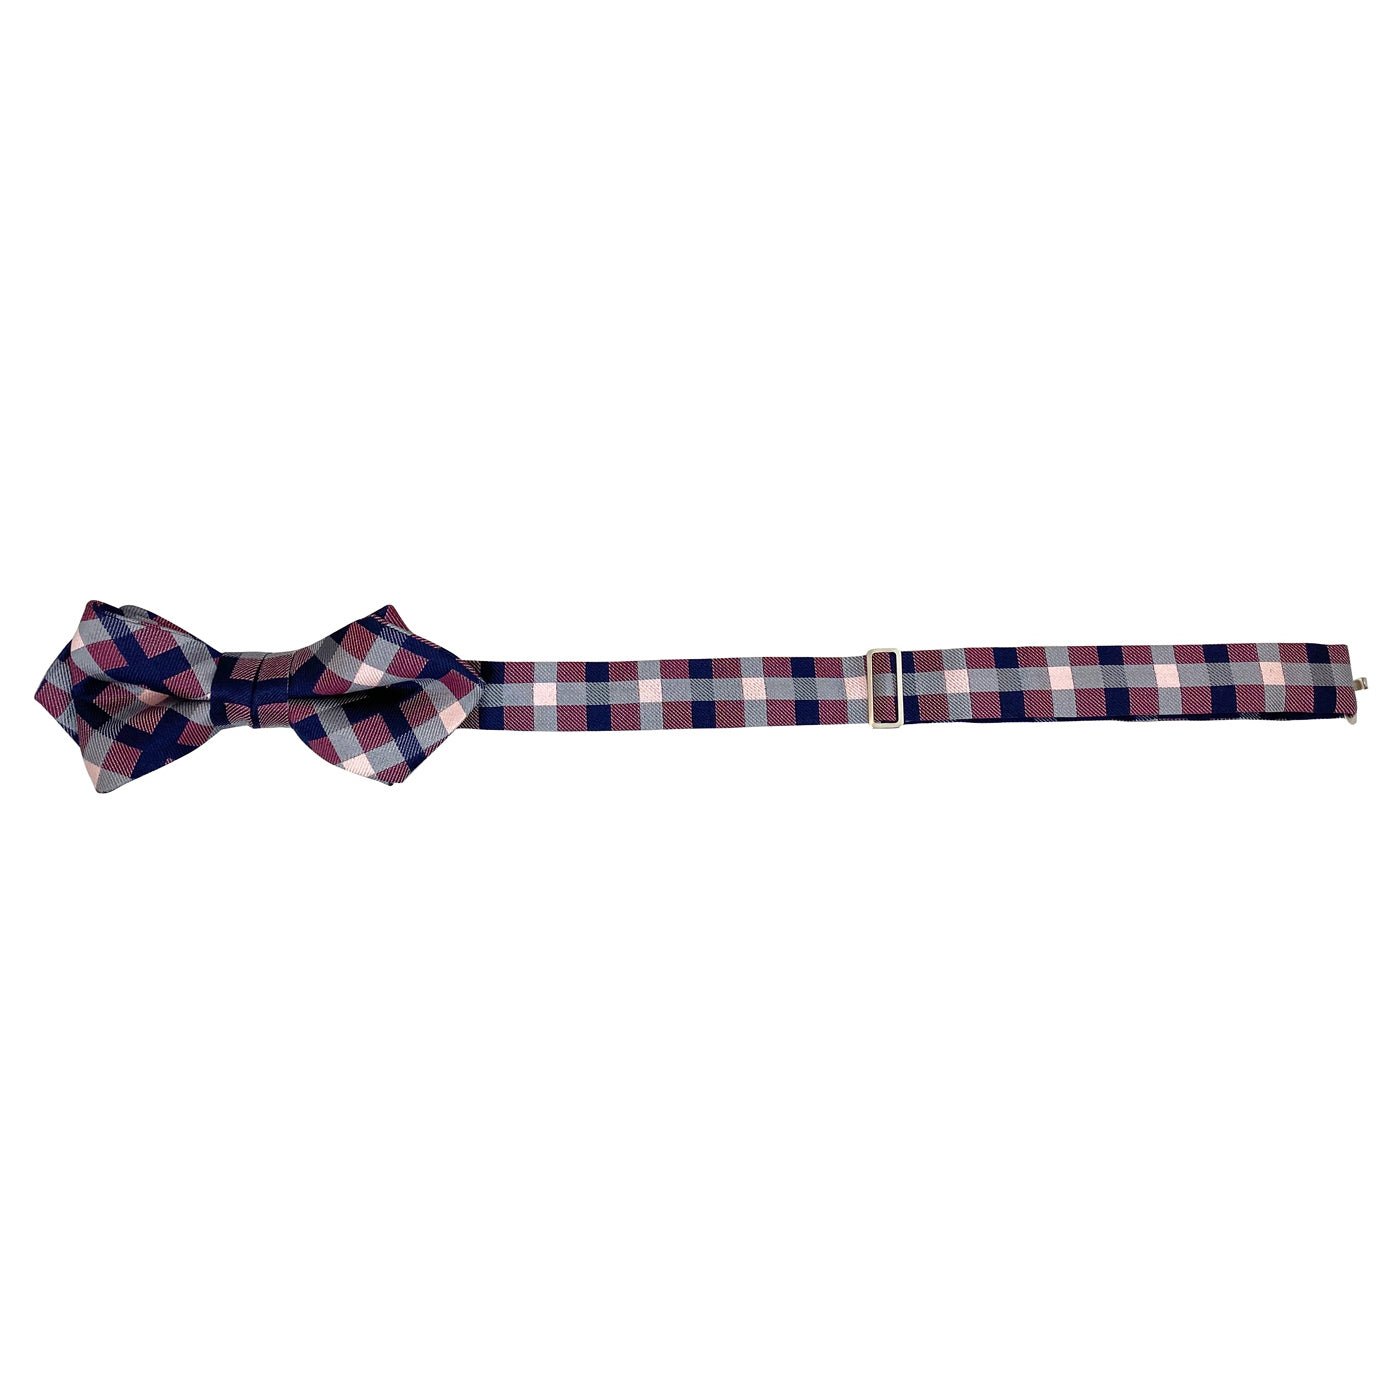 Men’s Pre-Tied Adjustable Bow Tie Silk 22. Revival Checkered Plaid Pattern Made in Japan FORTUNA Tokyo